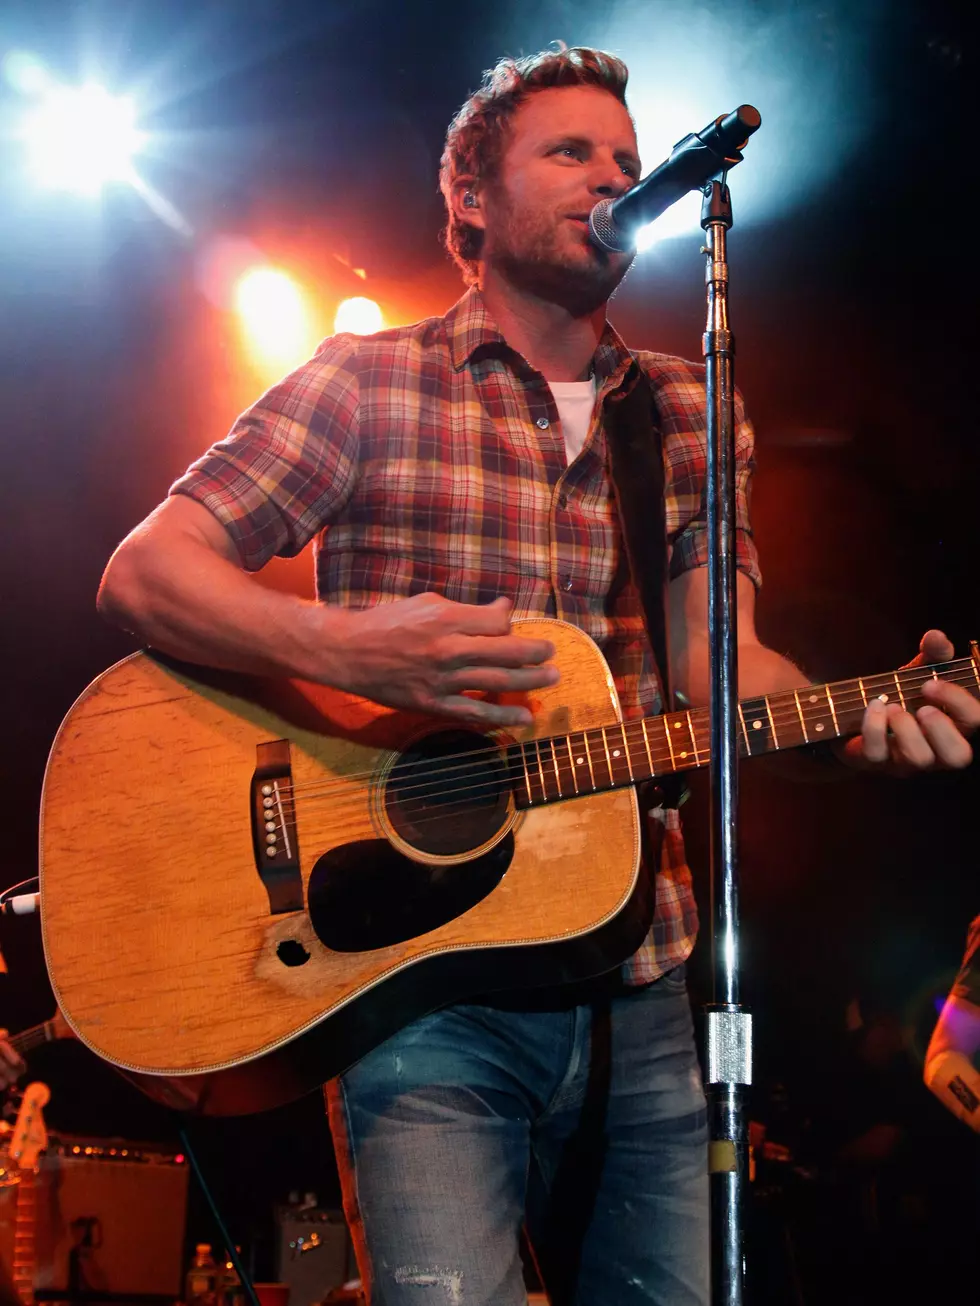 1 Day until Christmas…get Dierks tickets today to give tomorrow